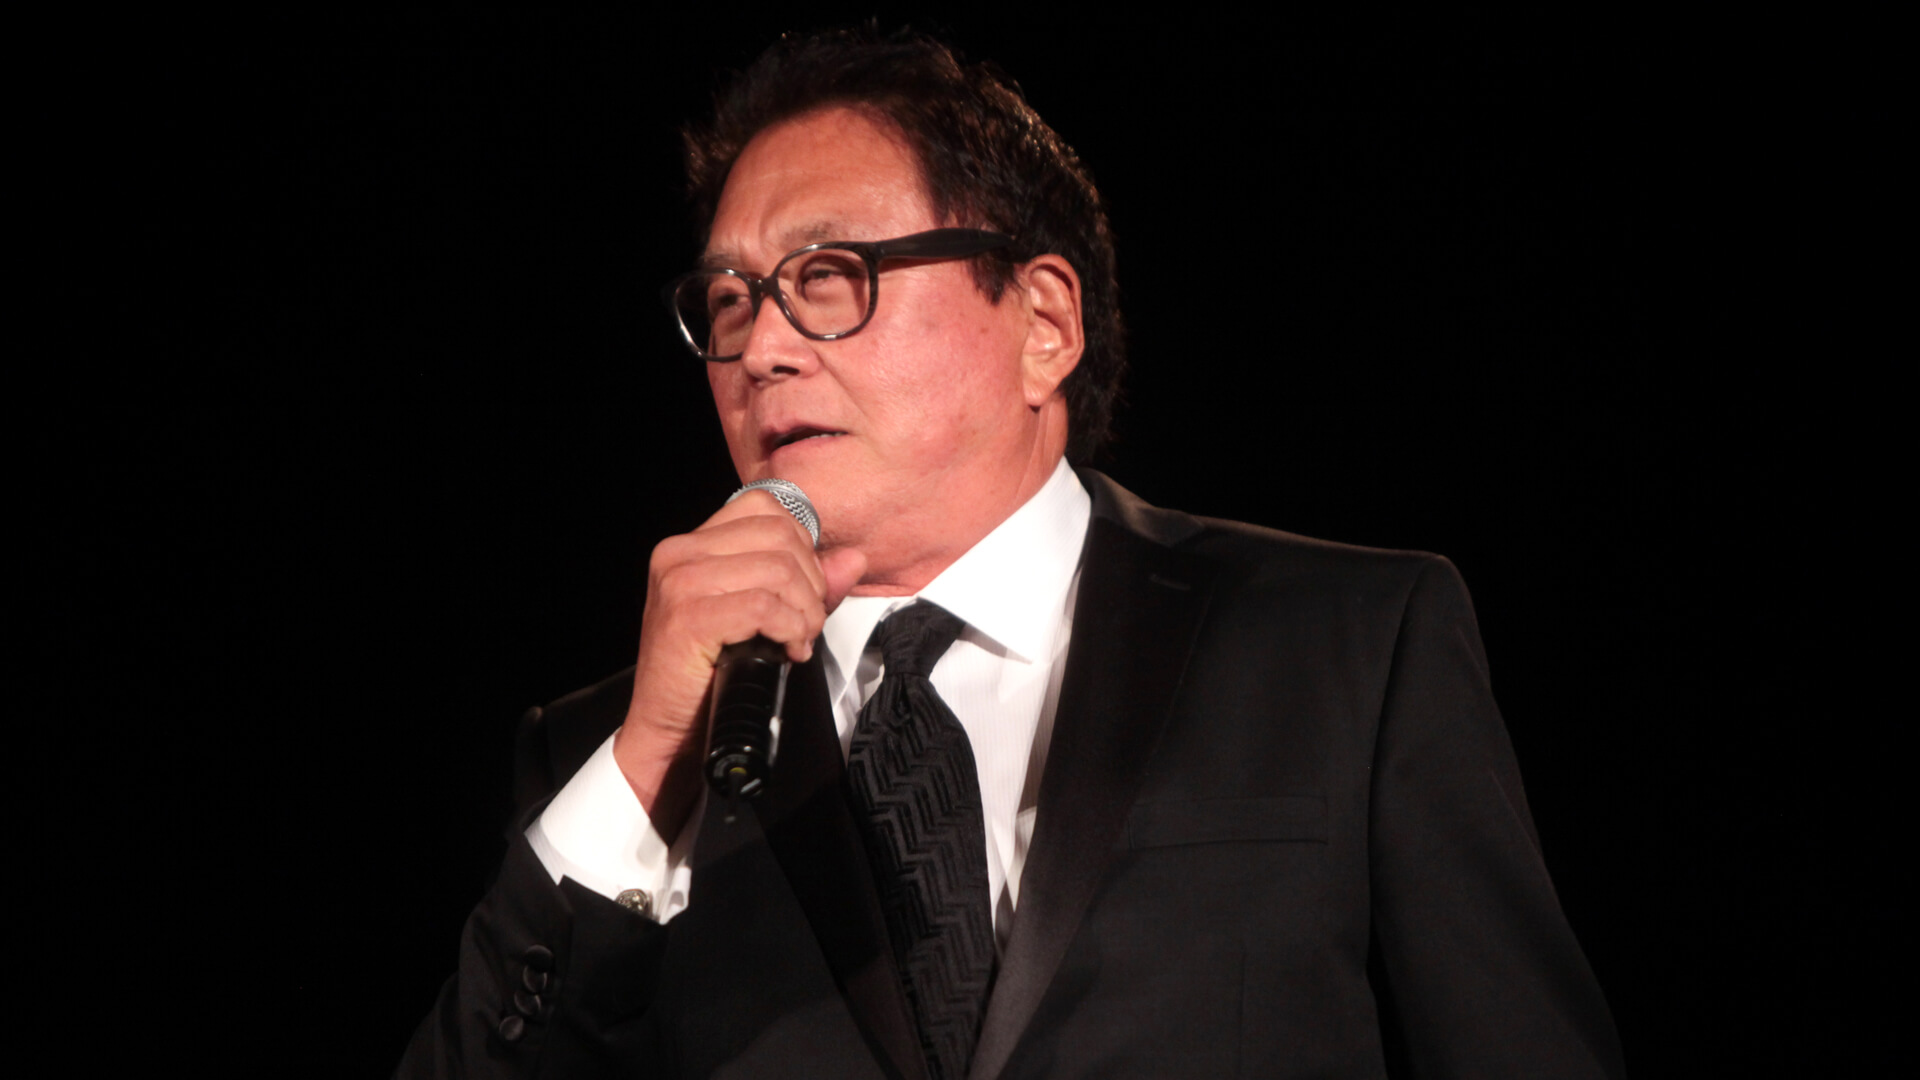 how to, robert kiyosaki: raising rei money is easy, but do you know how to get rich off it?